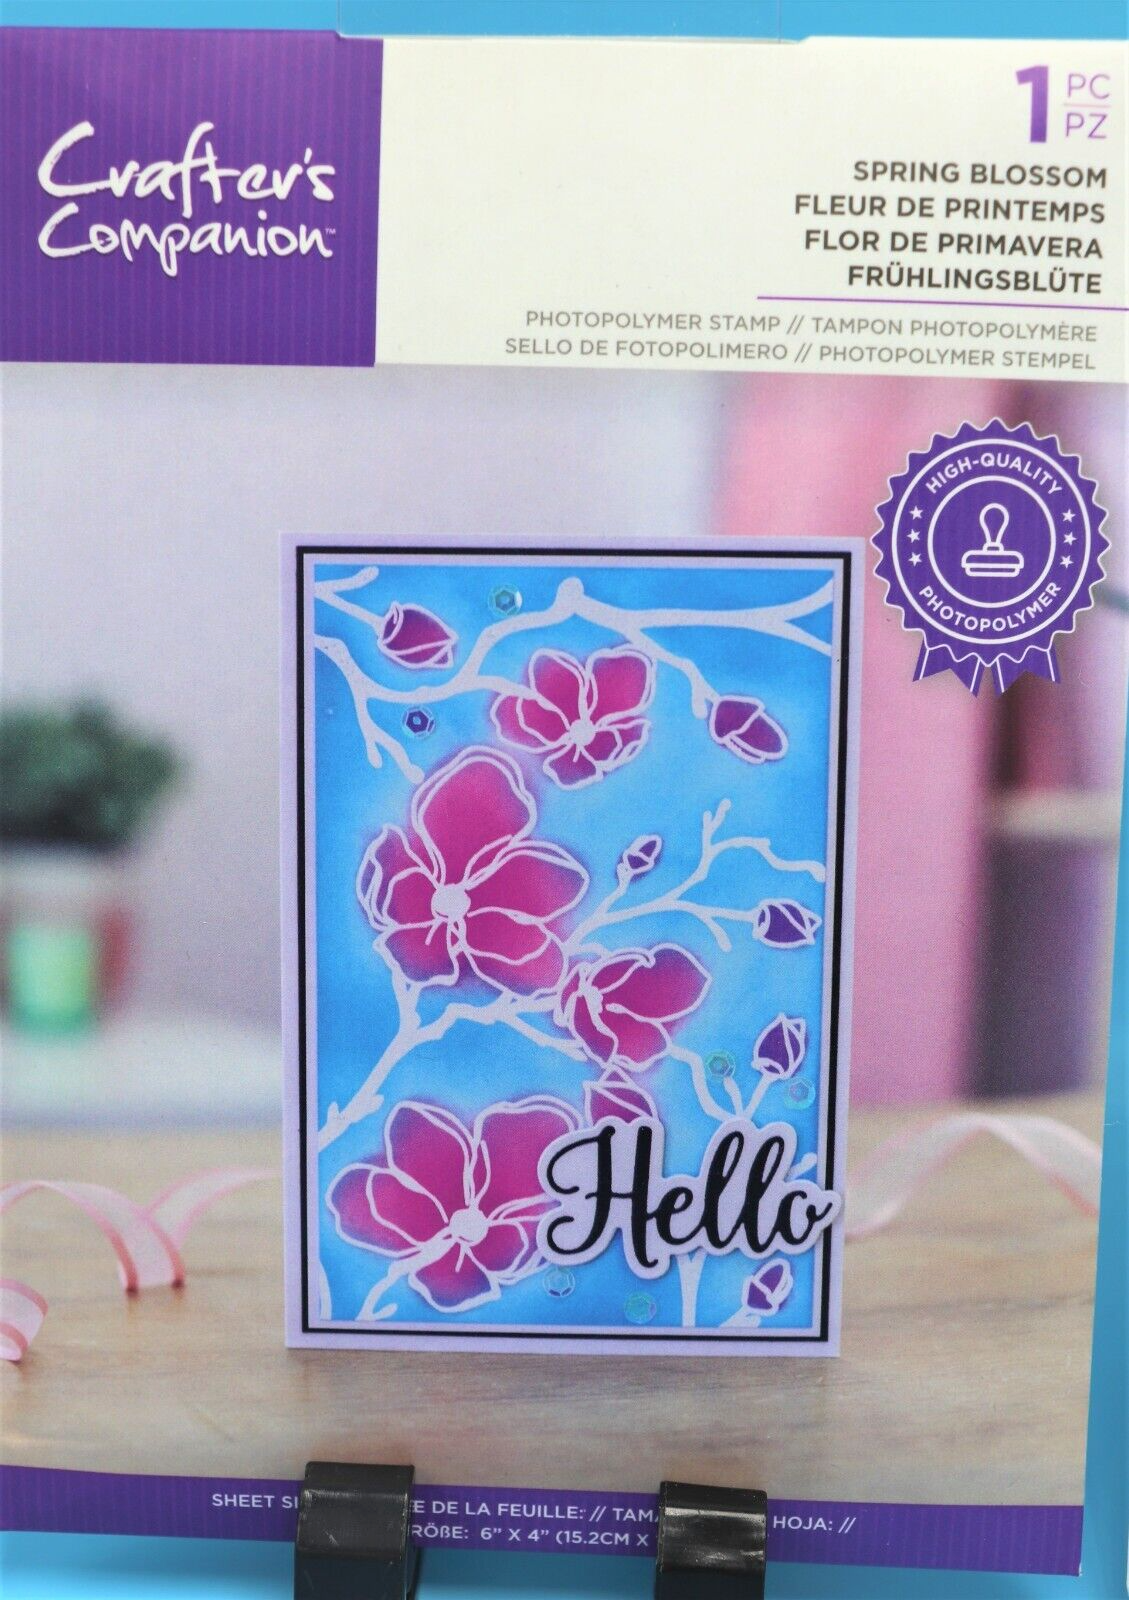 NEW Crafter's Companion Resist Silhouette Photopolymer Stamp Collection Crafter's Companion - фотография #2